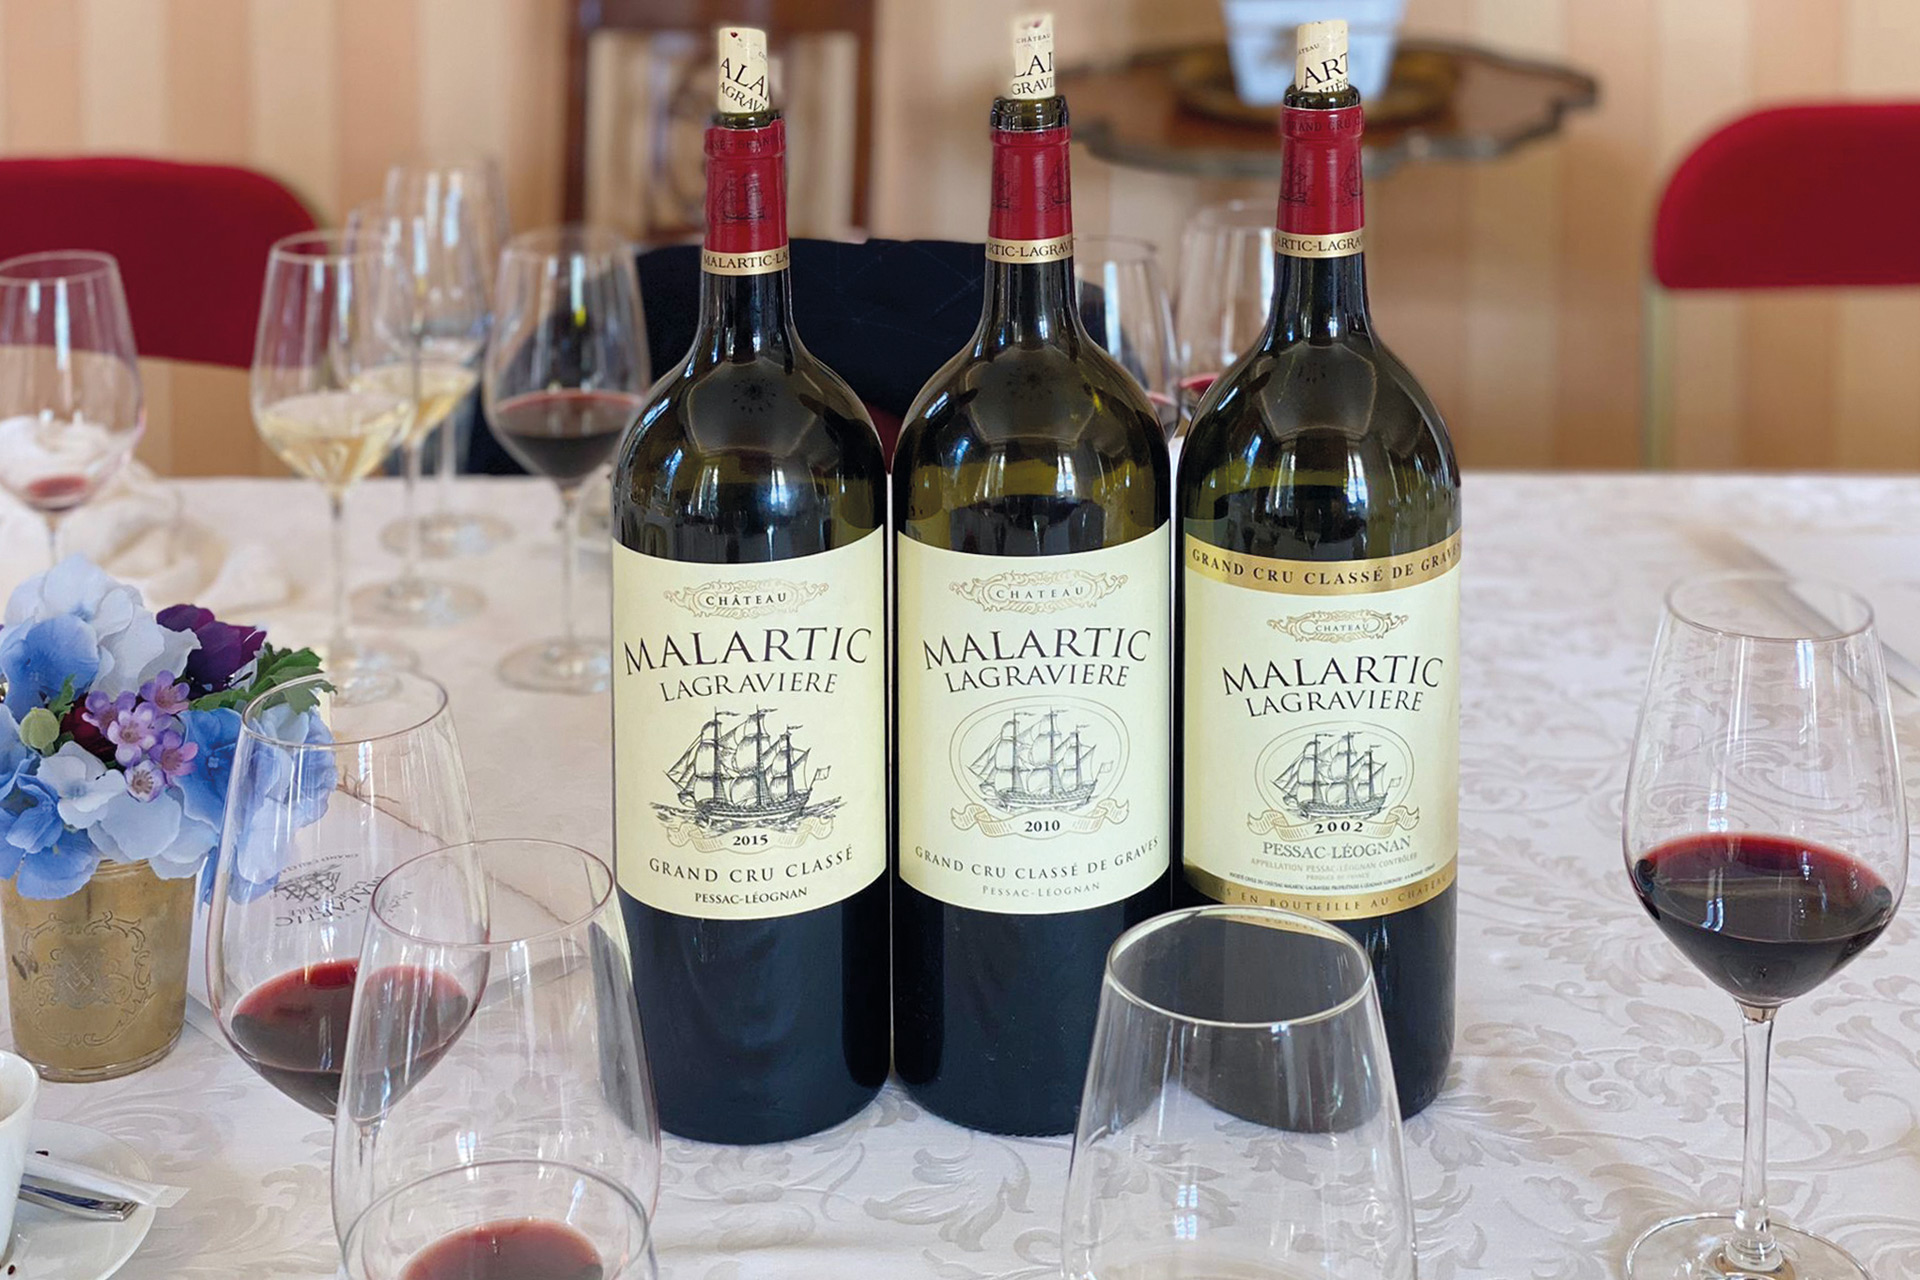 Three red wine bottles on a table, with glasses of red wine beside